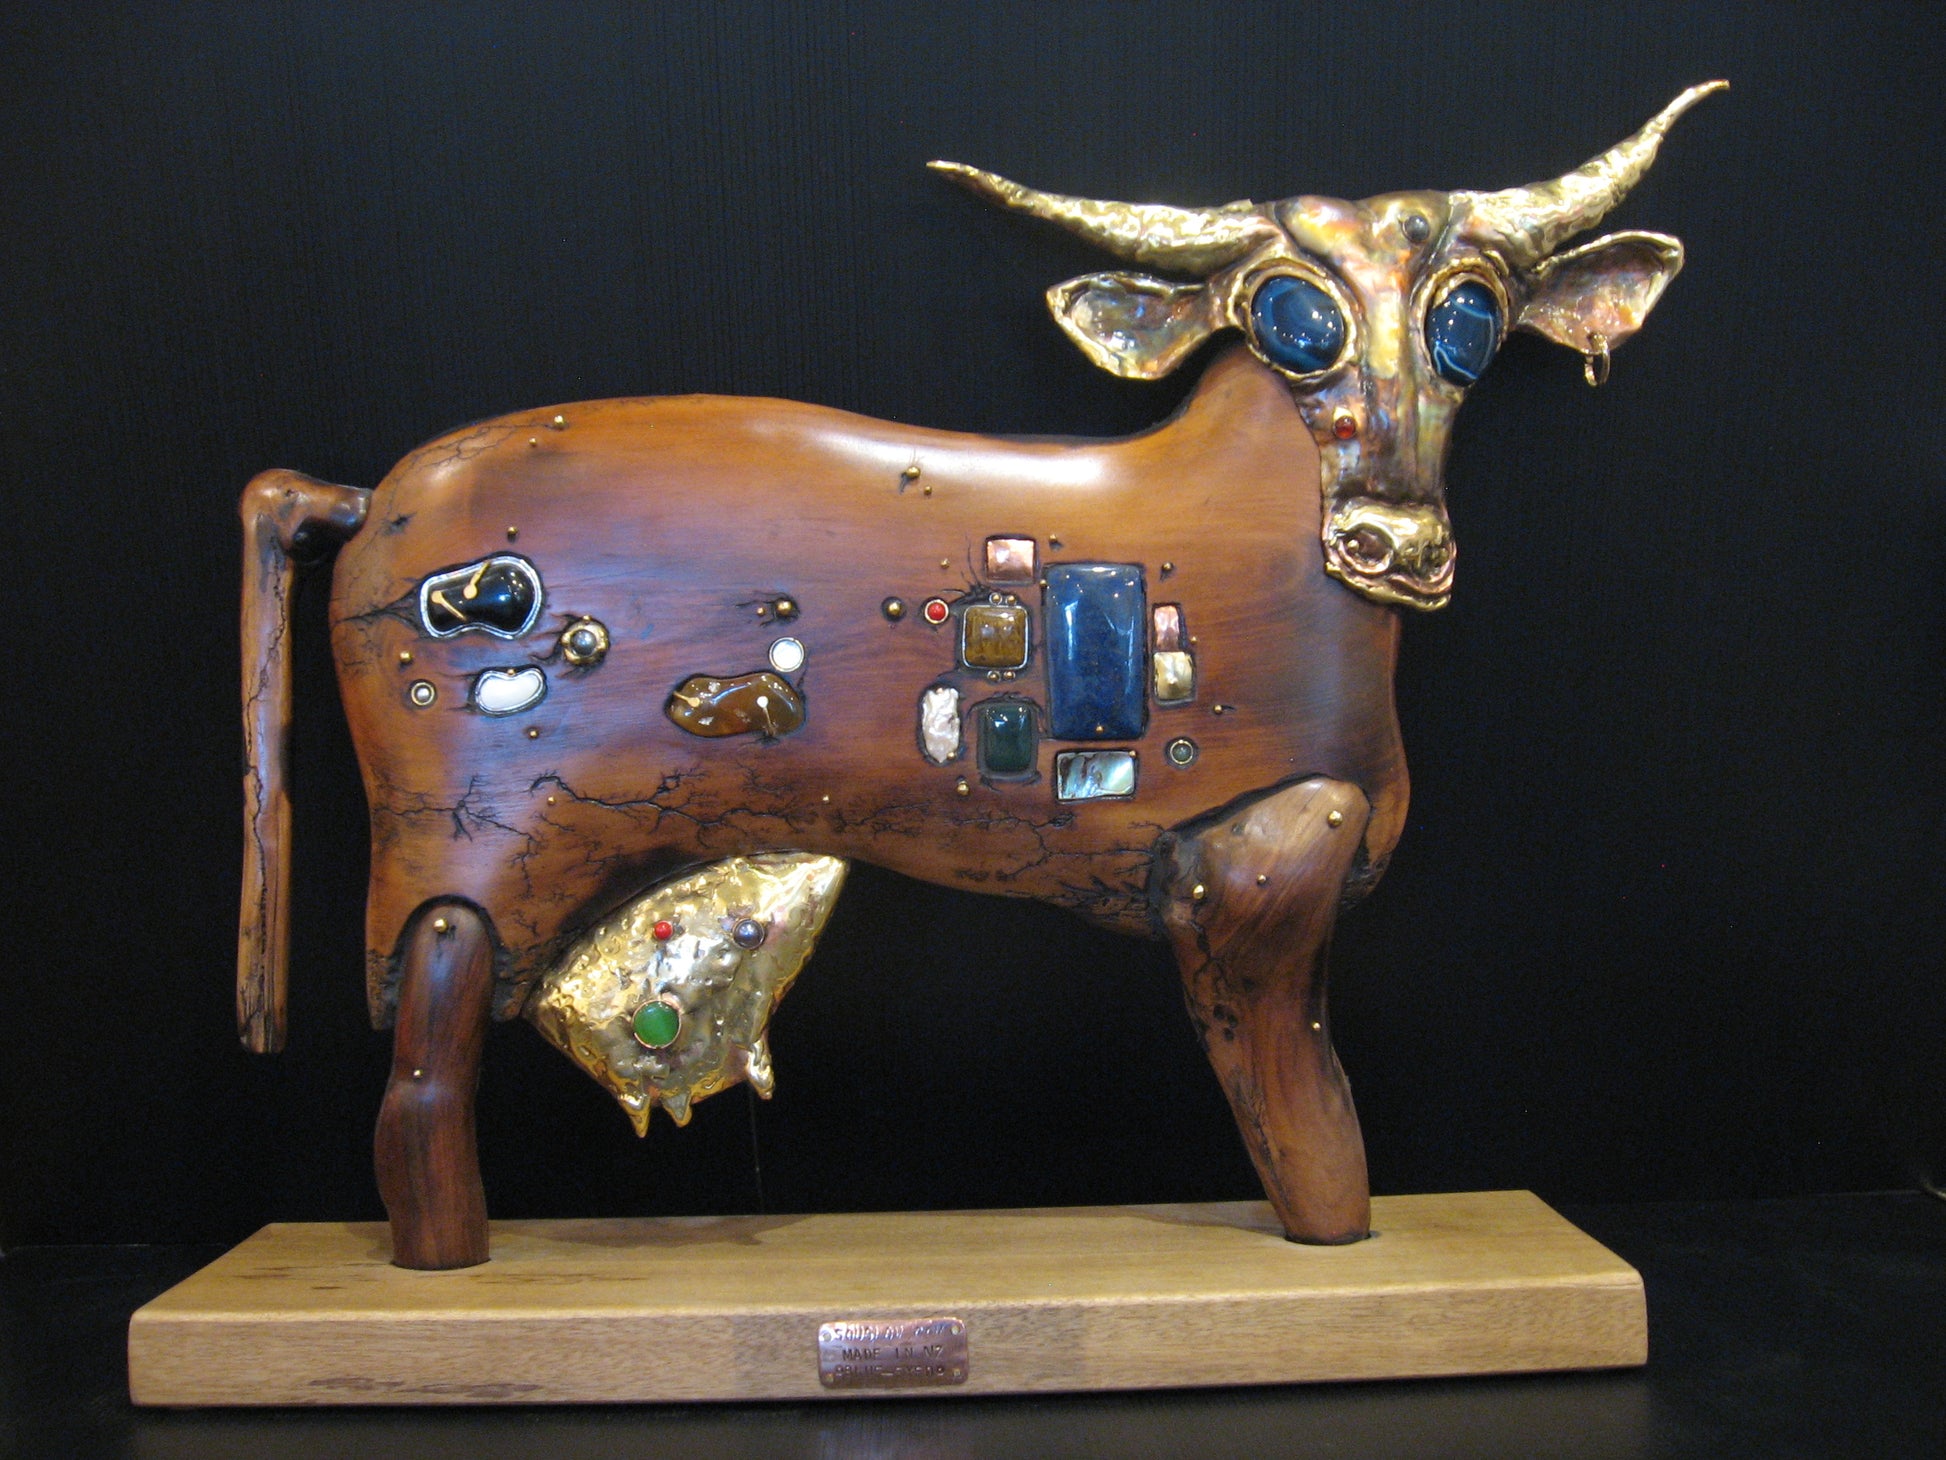 Cow Sculpture Art of Metal and Wood by Serge Souslov Silver Fern Gallery